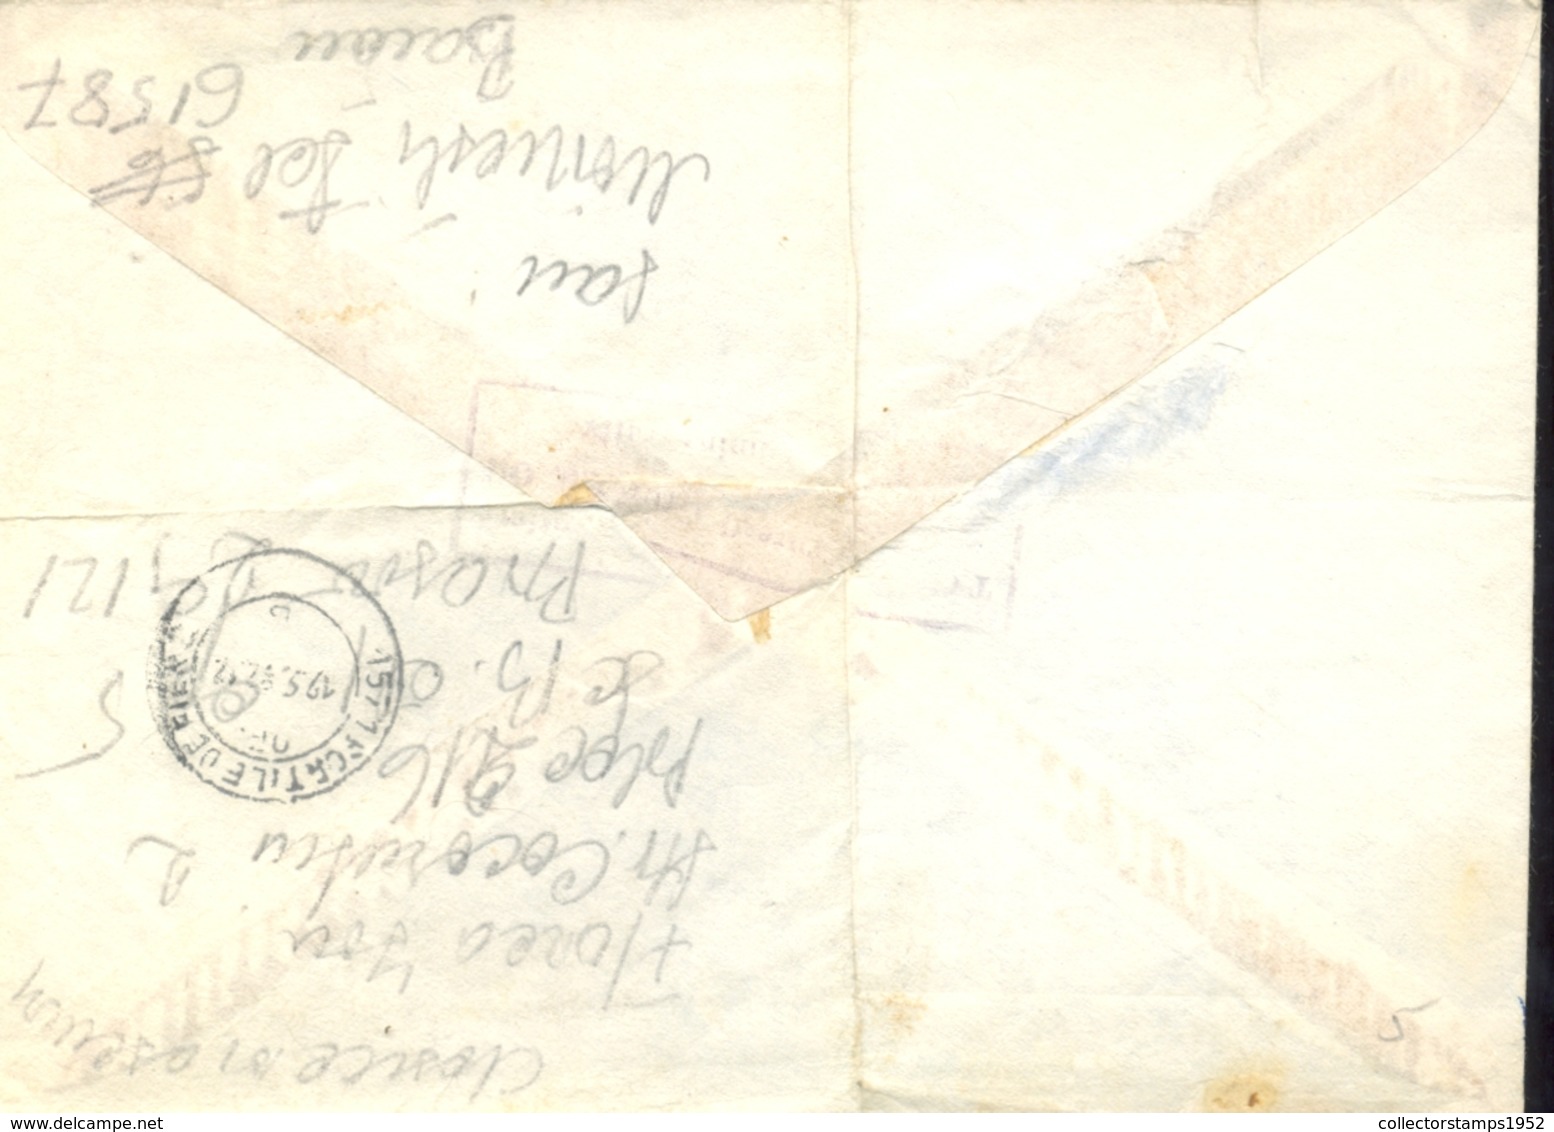 74275- MARASESTI MAUSOLEUM, MANOR, MARINER 4 SPACE PROBE, STAMPS ON REGISTERED COVER, 1982, ROMANIA - Lettres & Documents